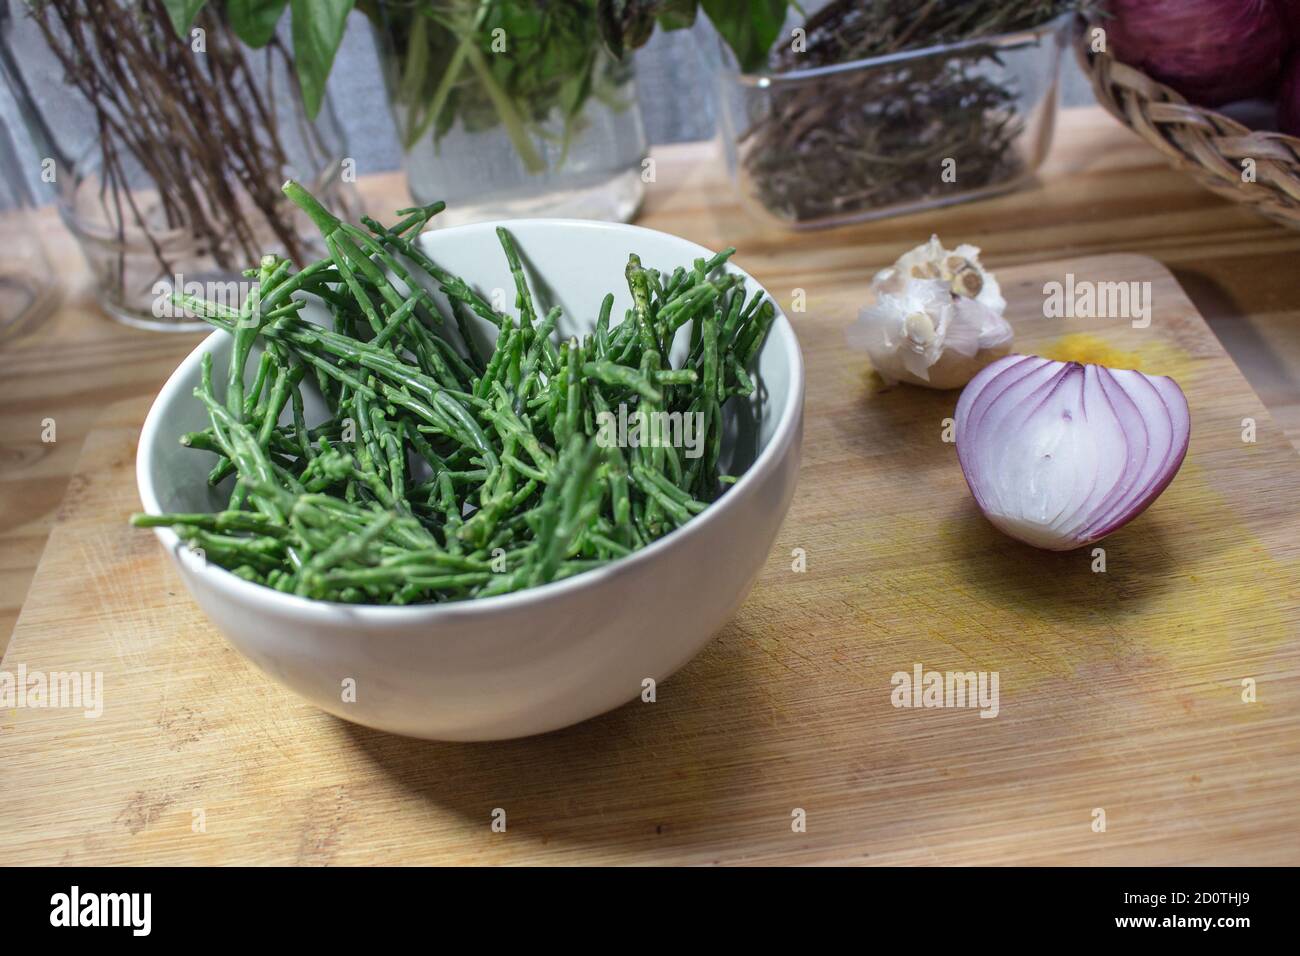 A bowl full of glasswort (sea asparagus) on a wooden cutting board with some herbs in the background Stock Photo